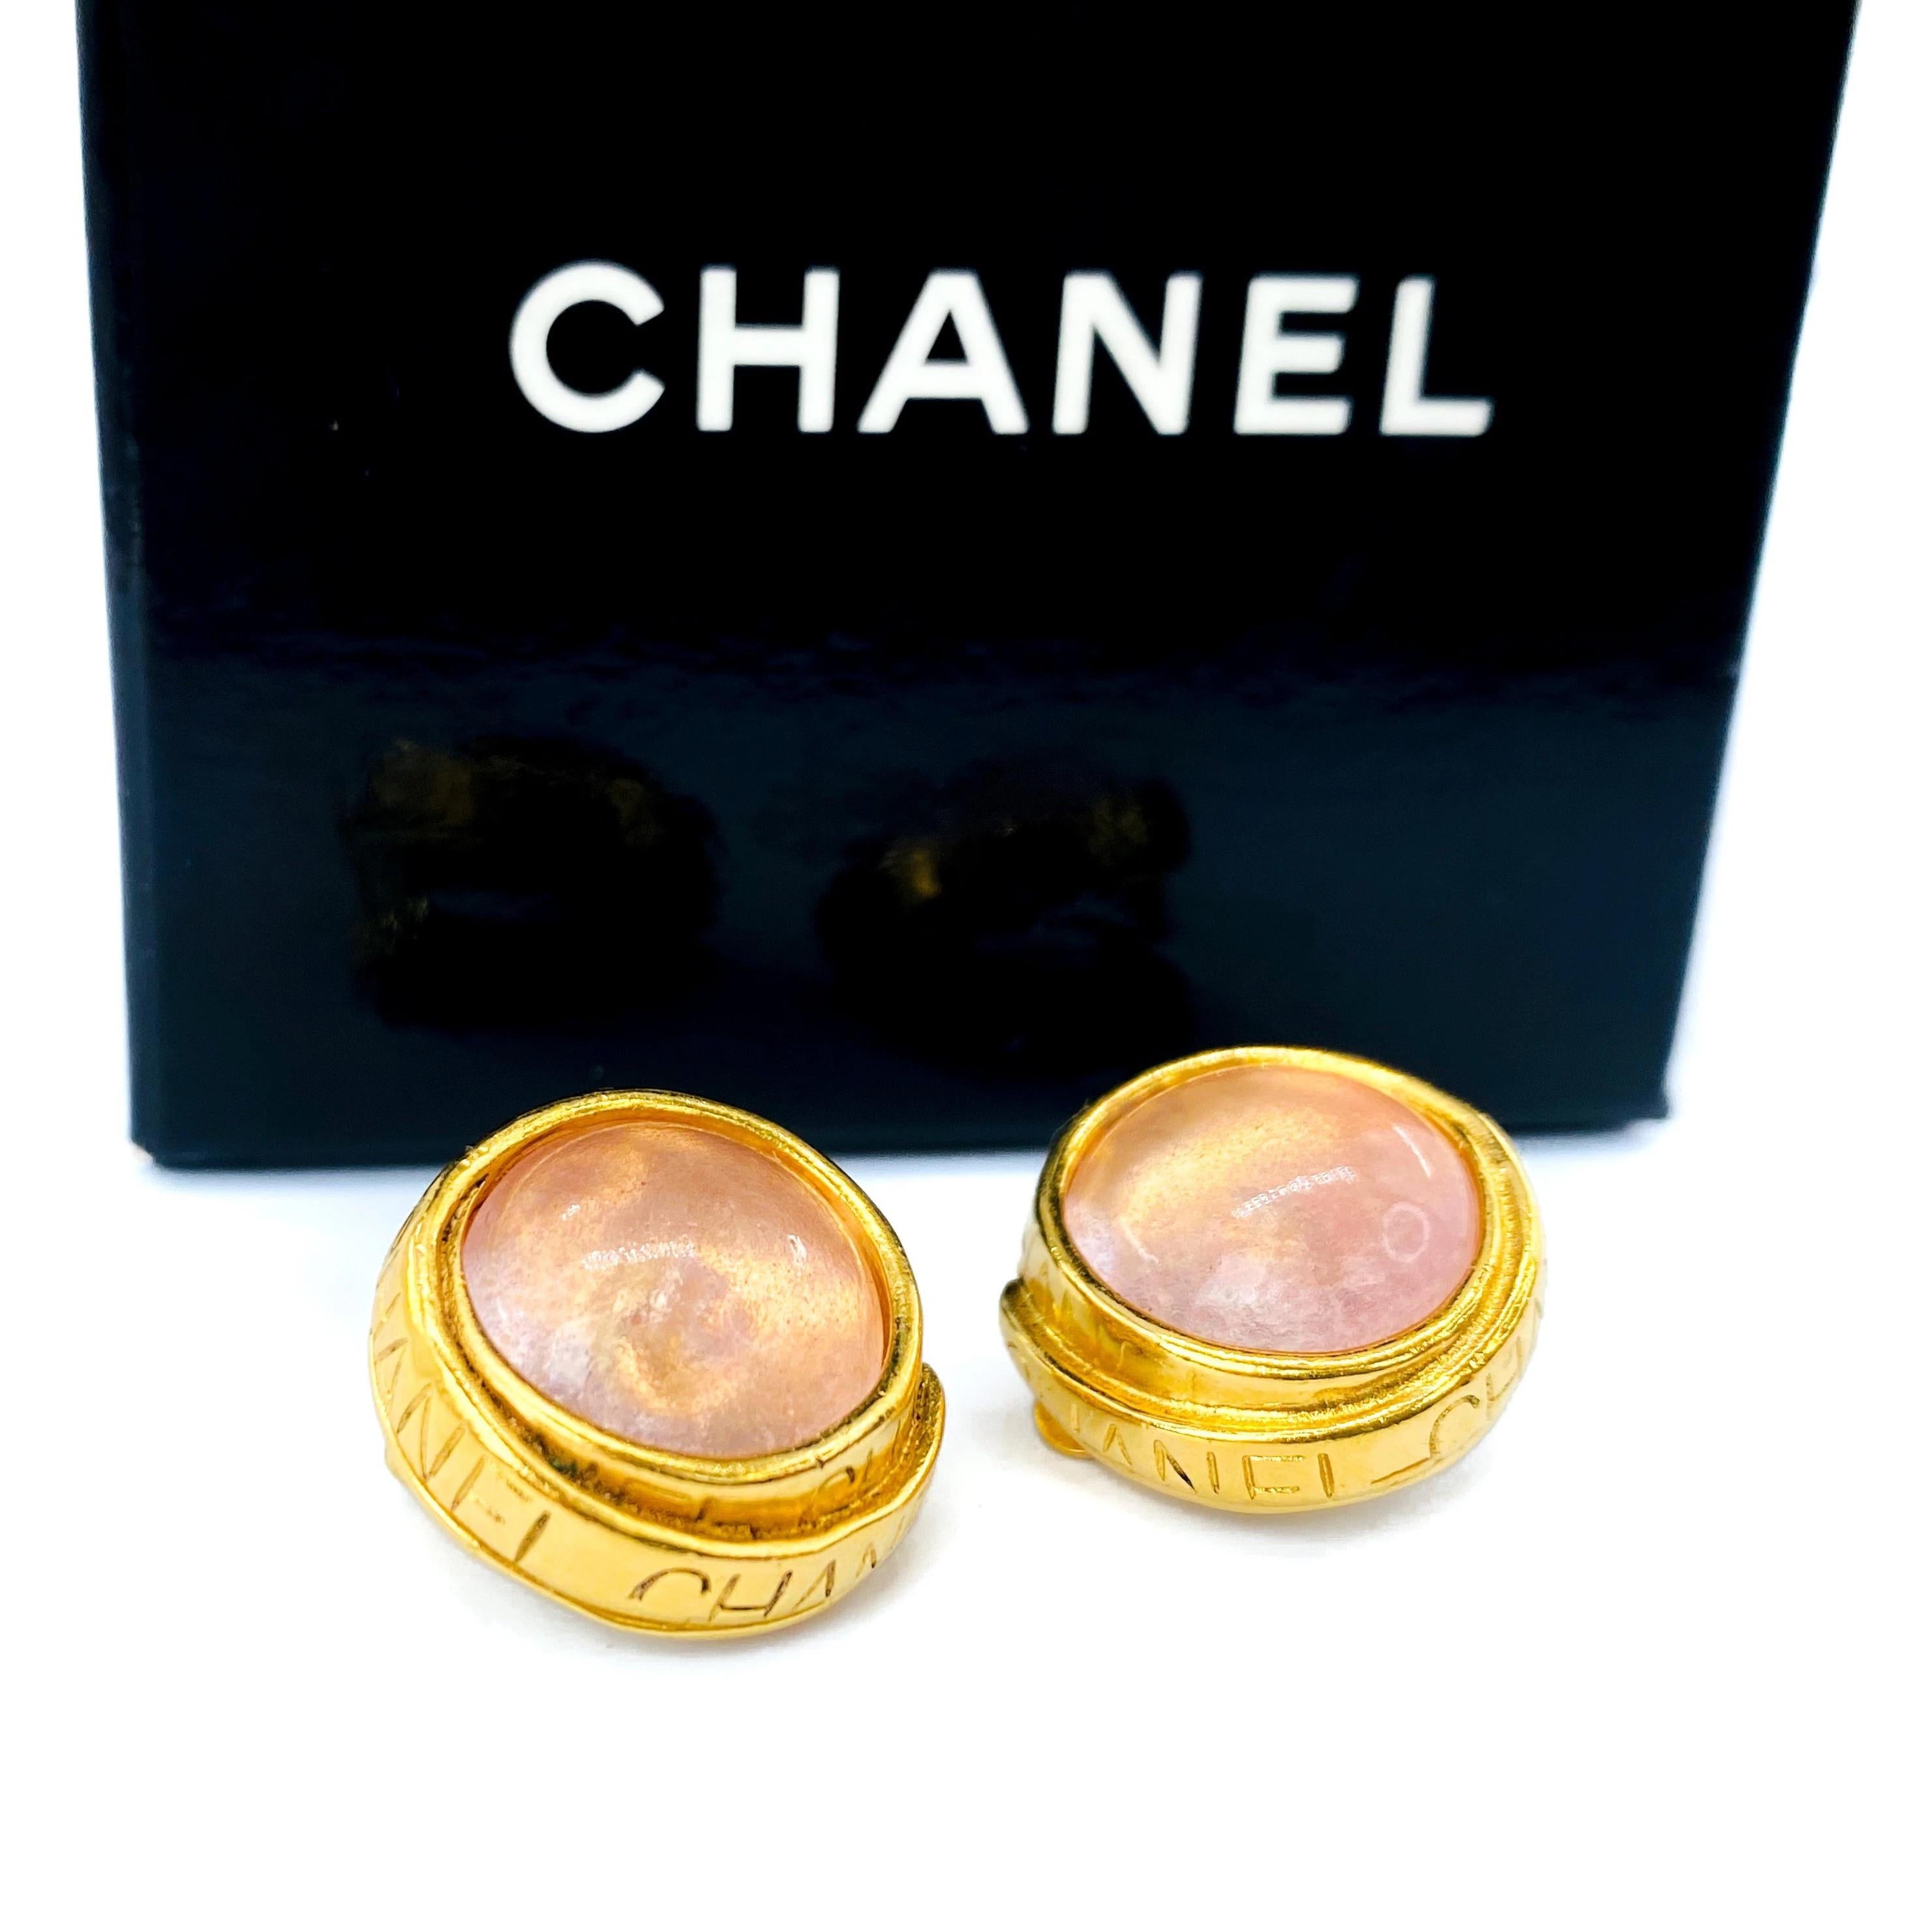 Chanel Earrings Vintage 1990s Clip On

Beautiful and timeless 90s vintage earrings from the house of chanel, still the most desirable fashion brand in the world. To be treasured forever.

Detail
-Made in France for the Spring 1996 Autumn Winter